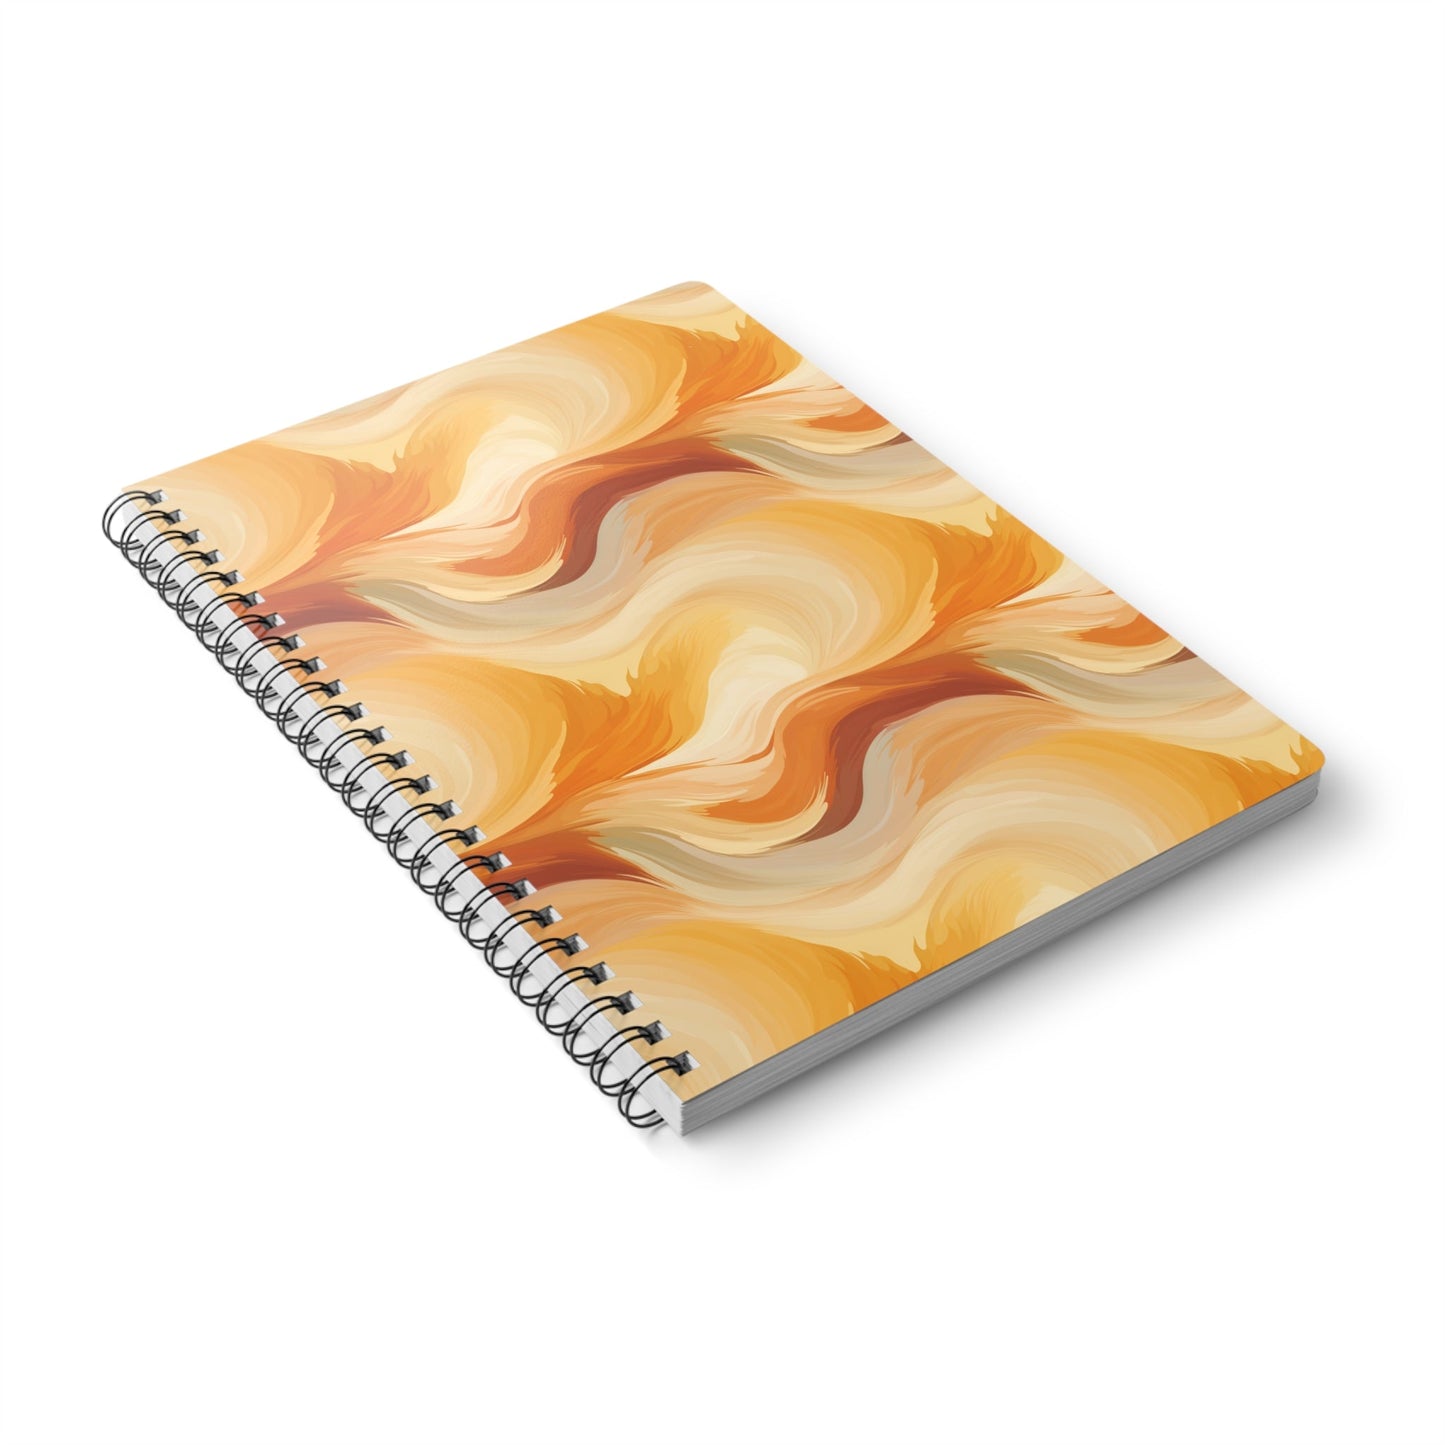 Amber Waves: The Breath of Autumn - Notebook (A5) - Pattern Symphony